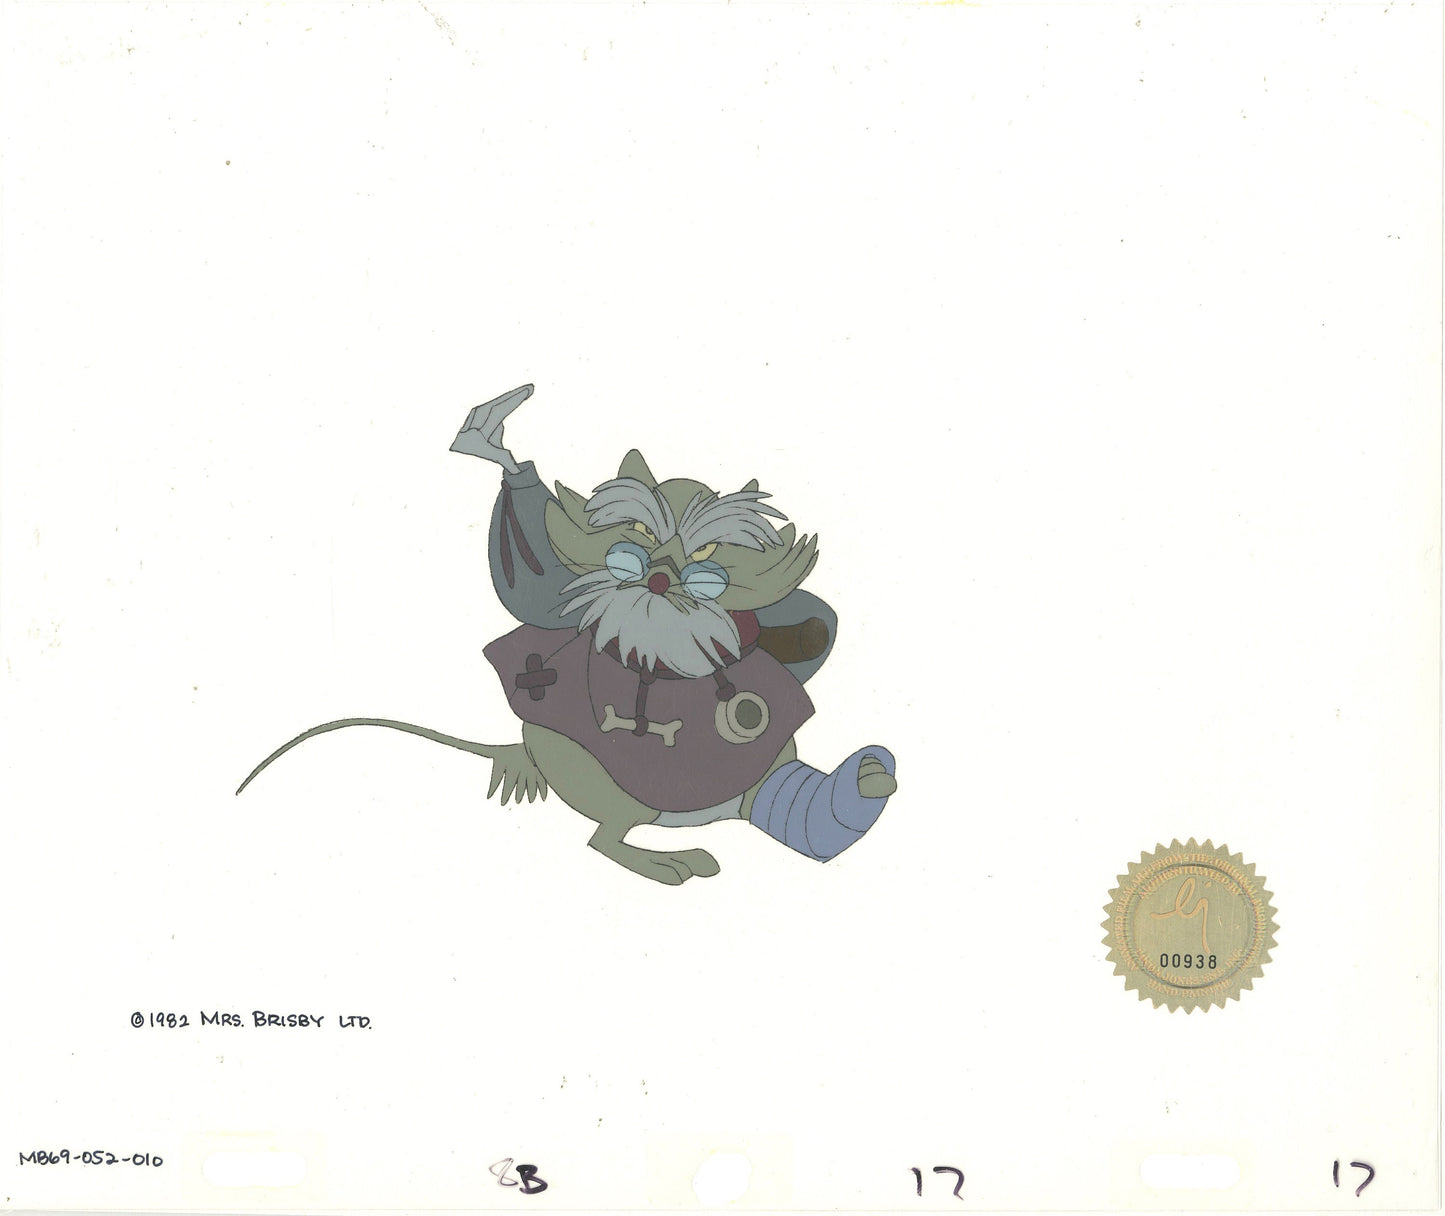 Don Bluth Secret of NIMH Mr Ages 1982 Original Production Animation Cel Used to make the cartoon 052-010